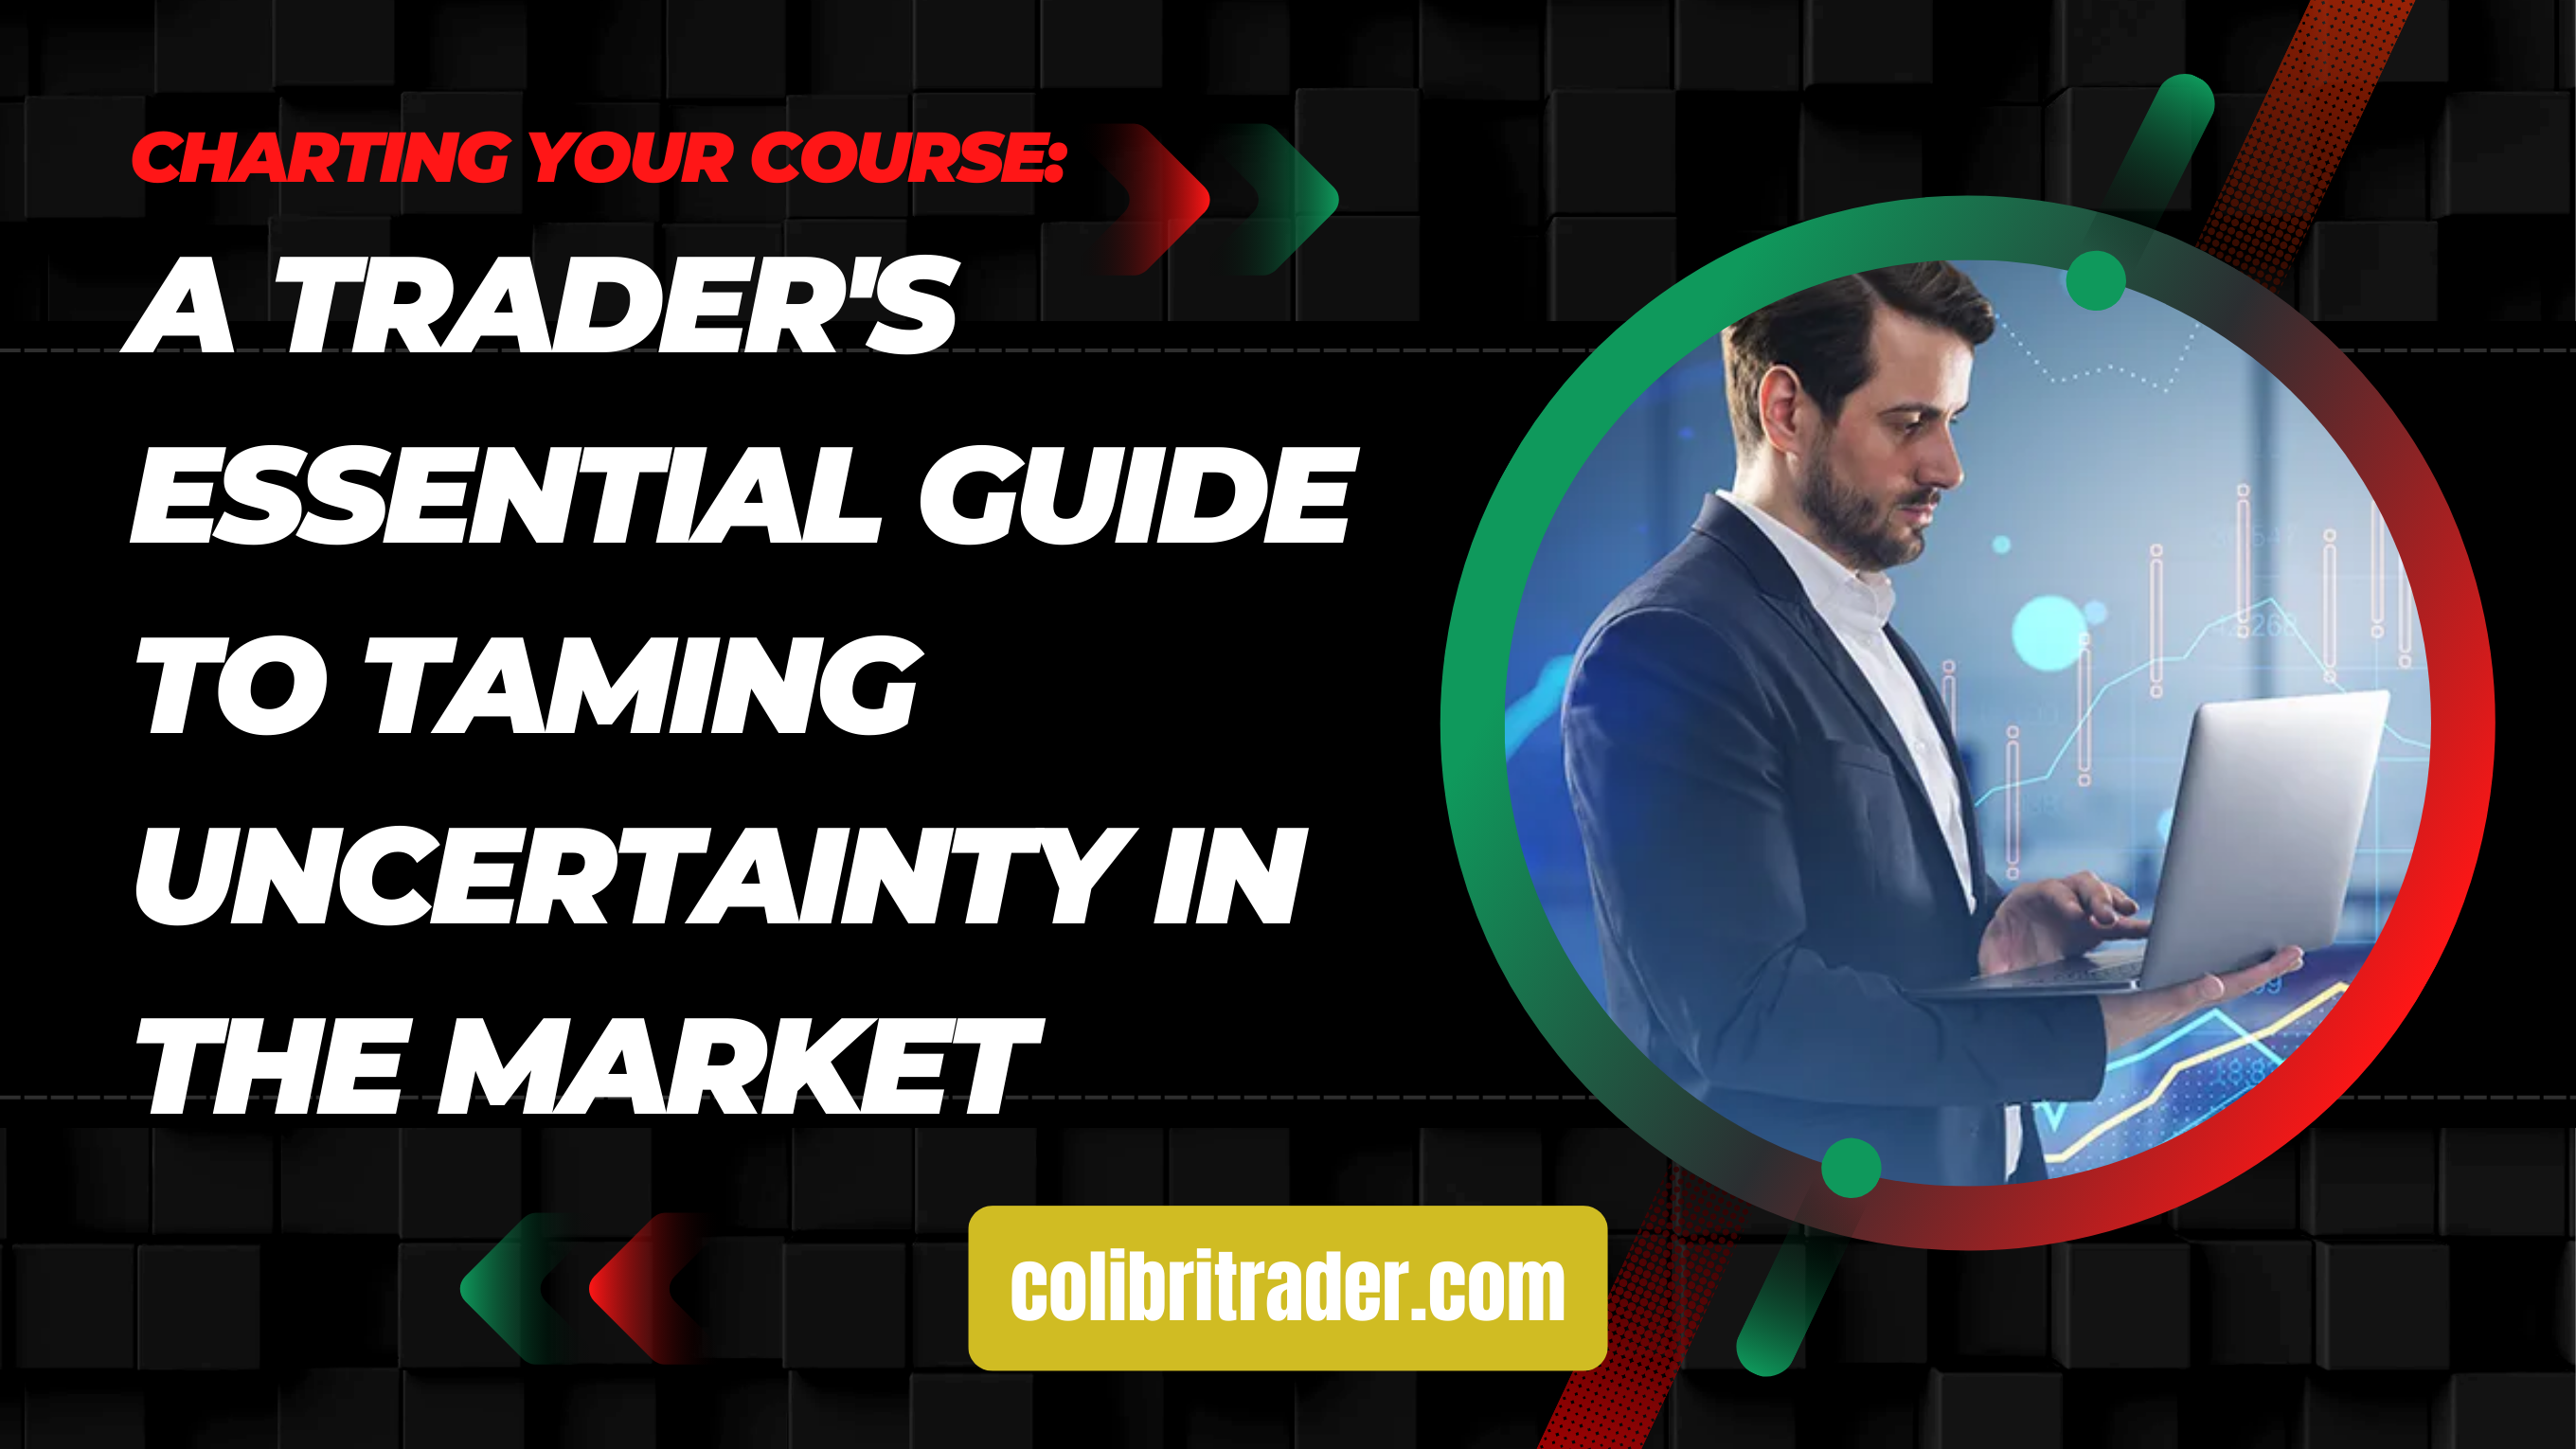 Charting Your Course: A Trader's Essential Guide to Taming Uncertainty in the Market